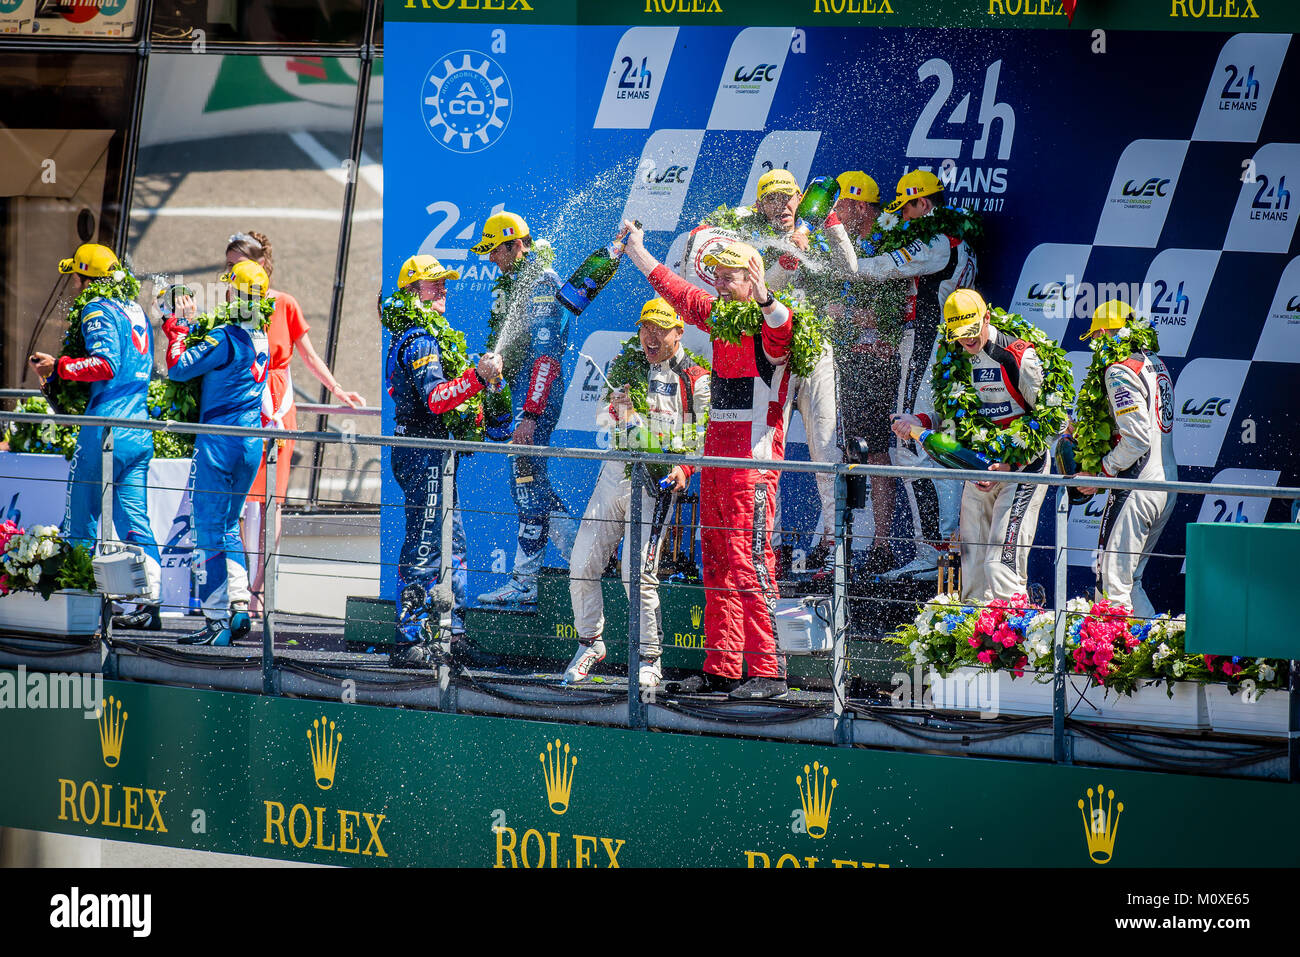 Trophy presentations & Champagne spraying on the podium for the Winners of the 2017 24 Hours Le Mans at Circuit de la Sarthe on Sunday 18 June 2017. Stock Photo